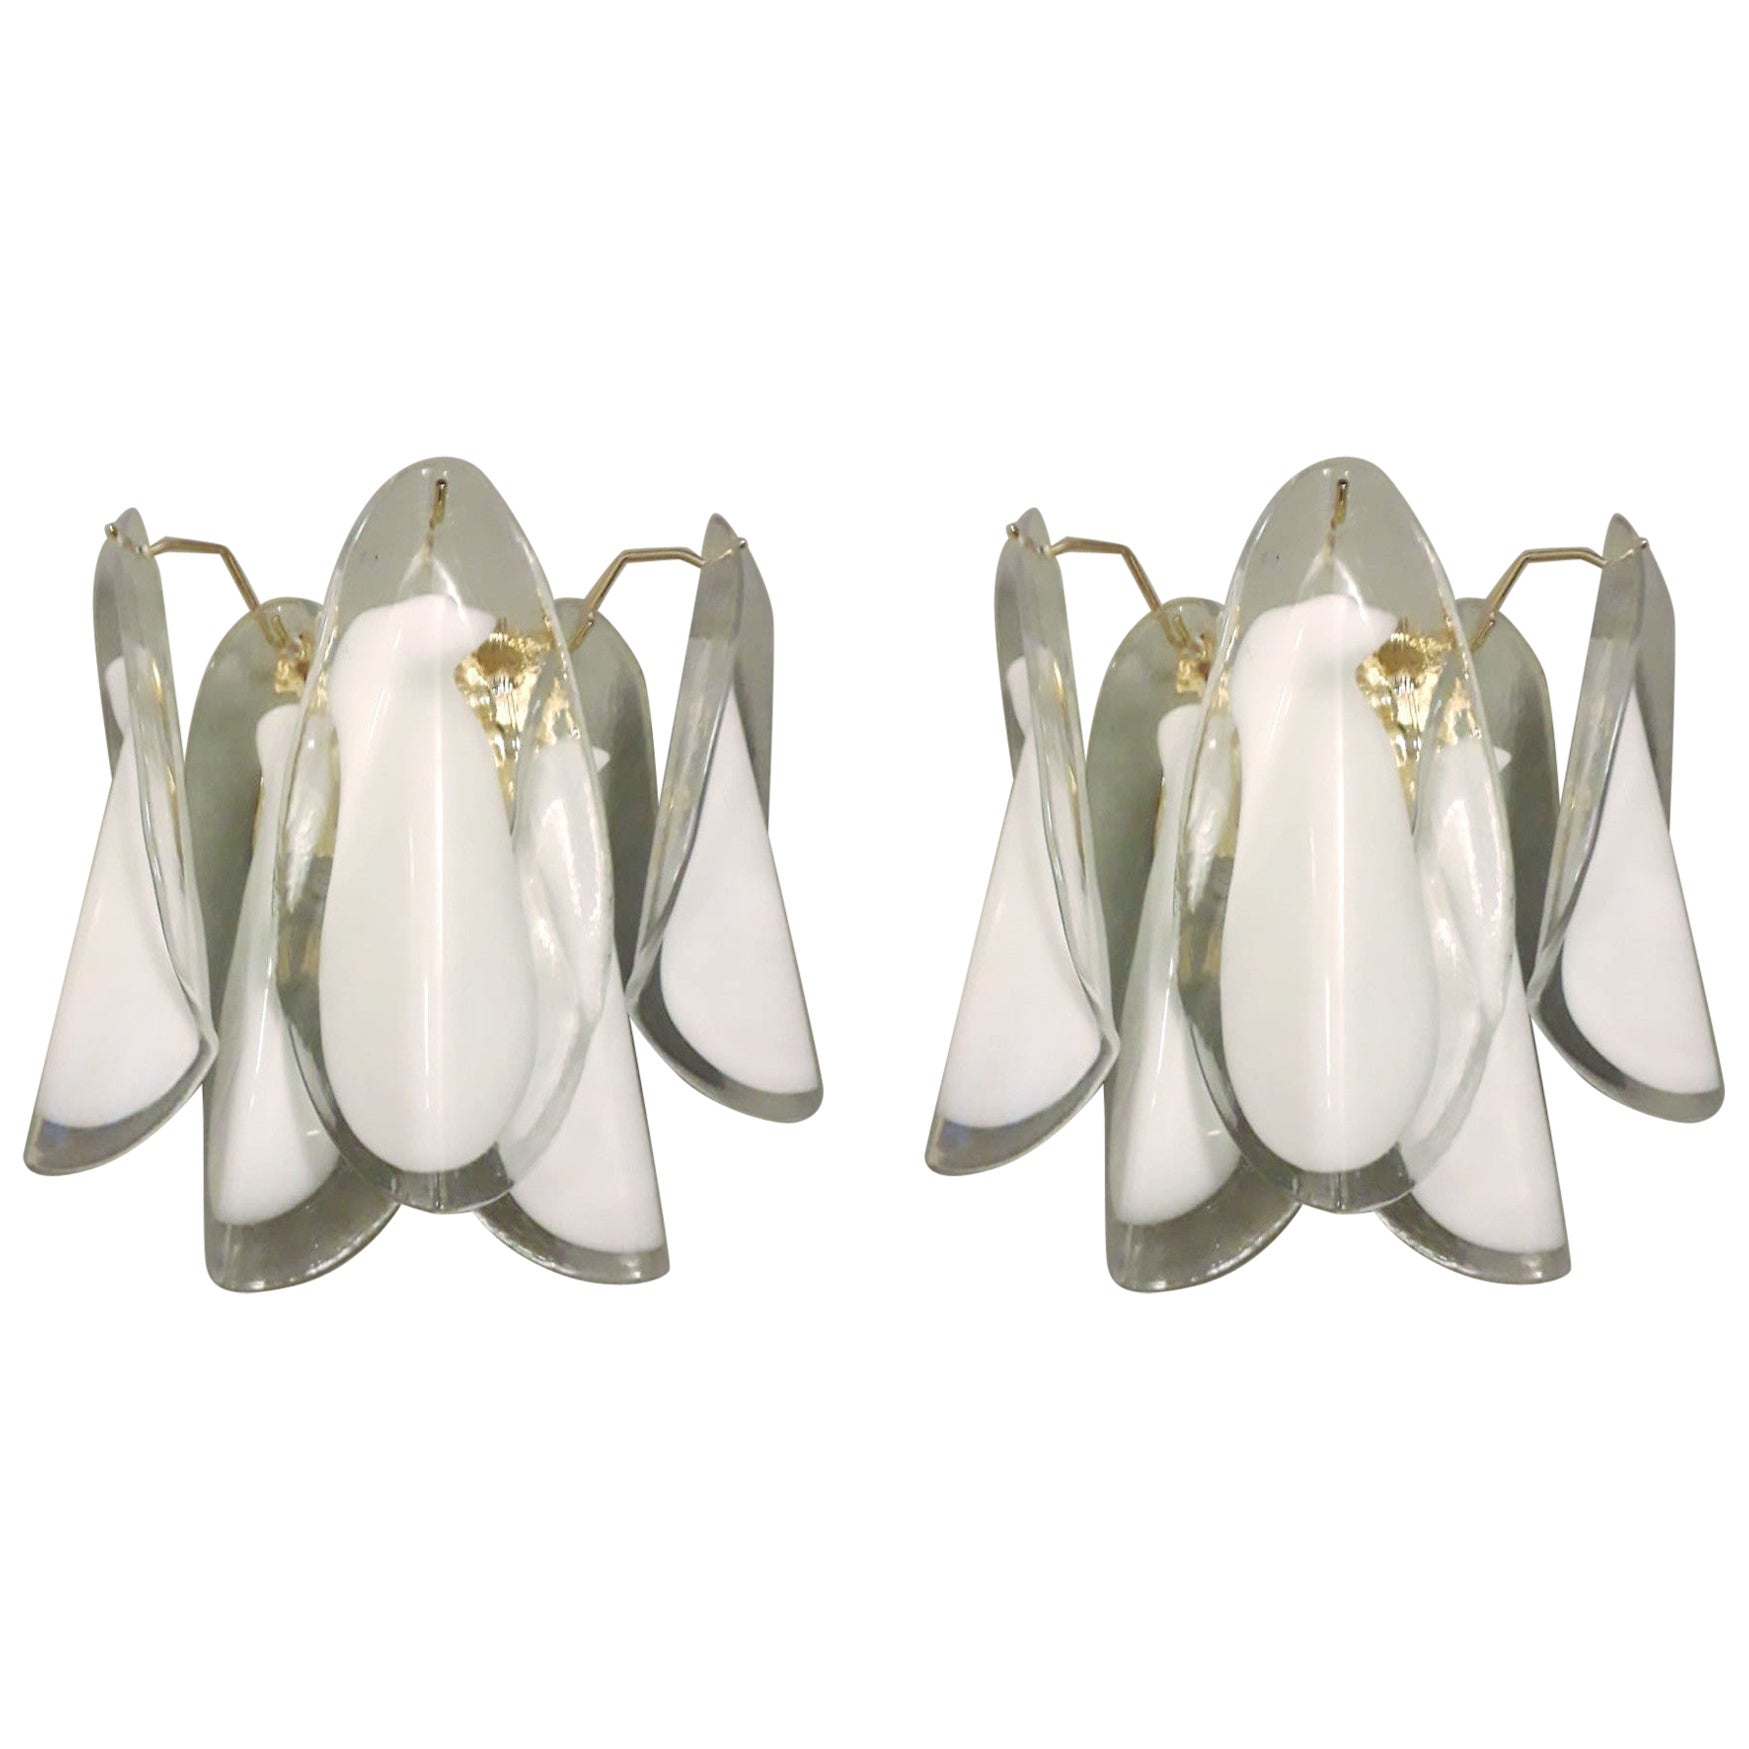 Pair of Rondine Sconces For Sale